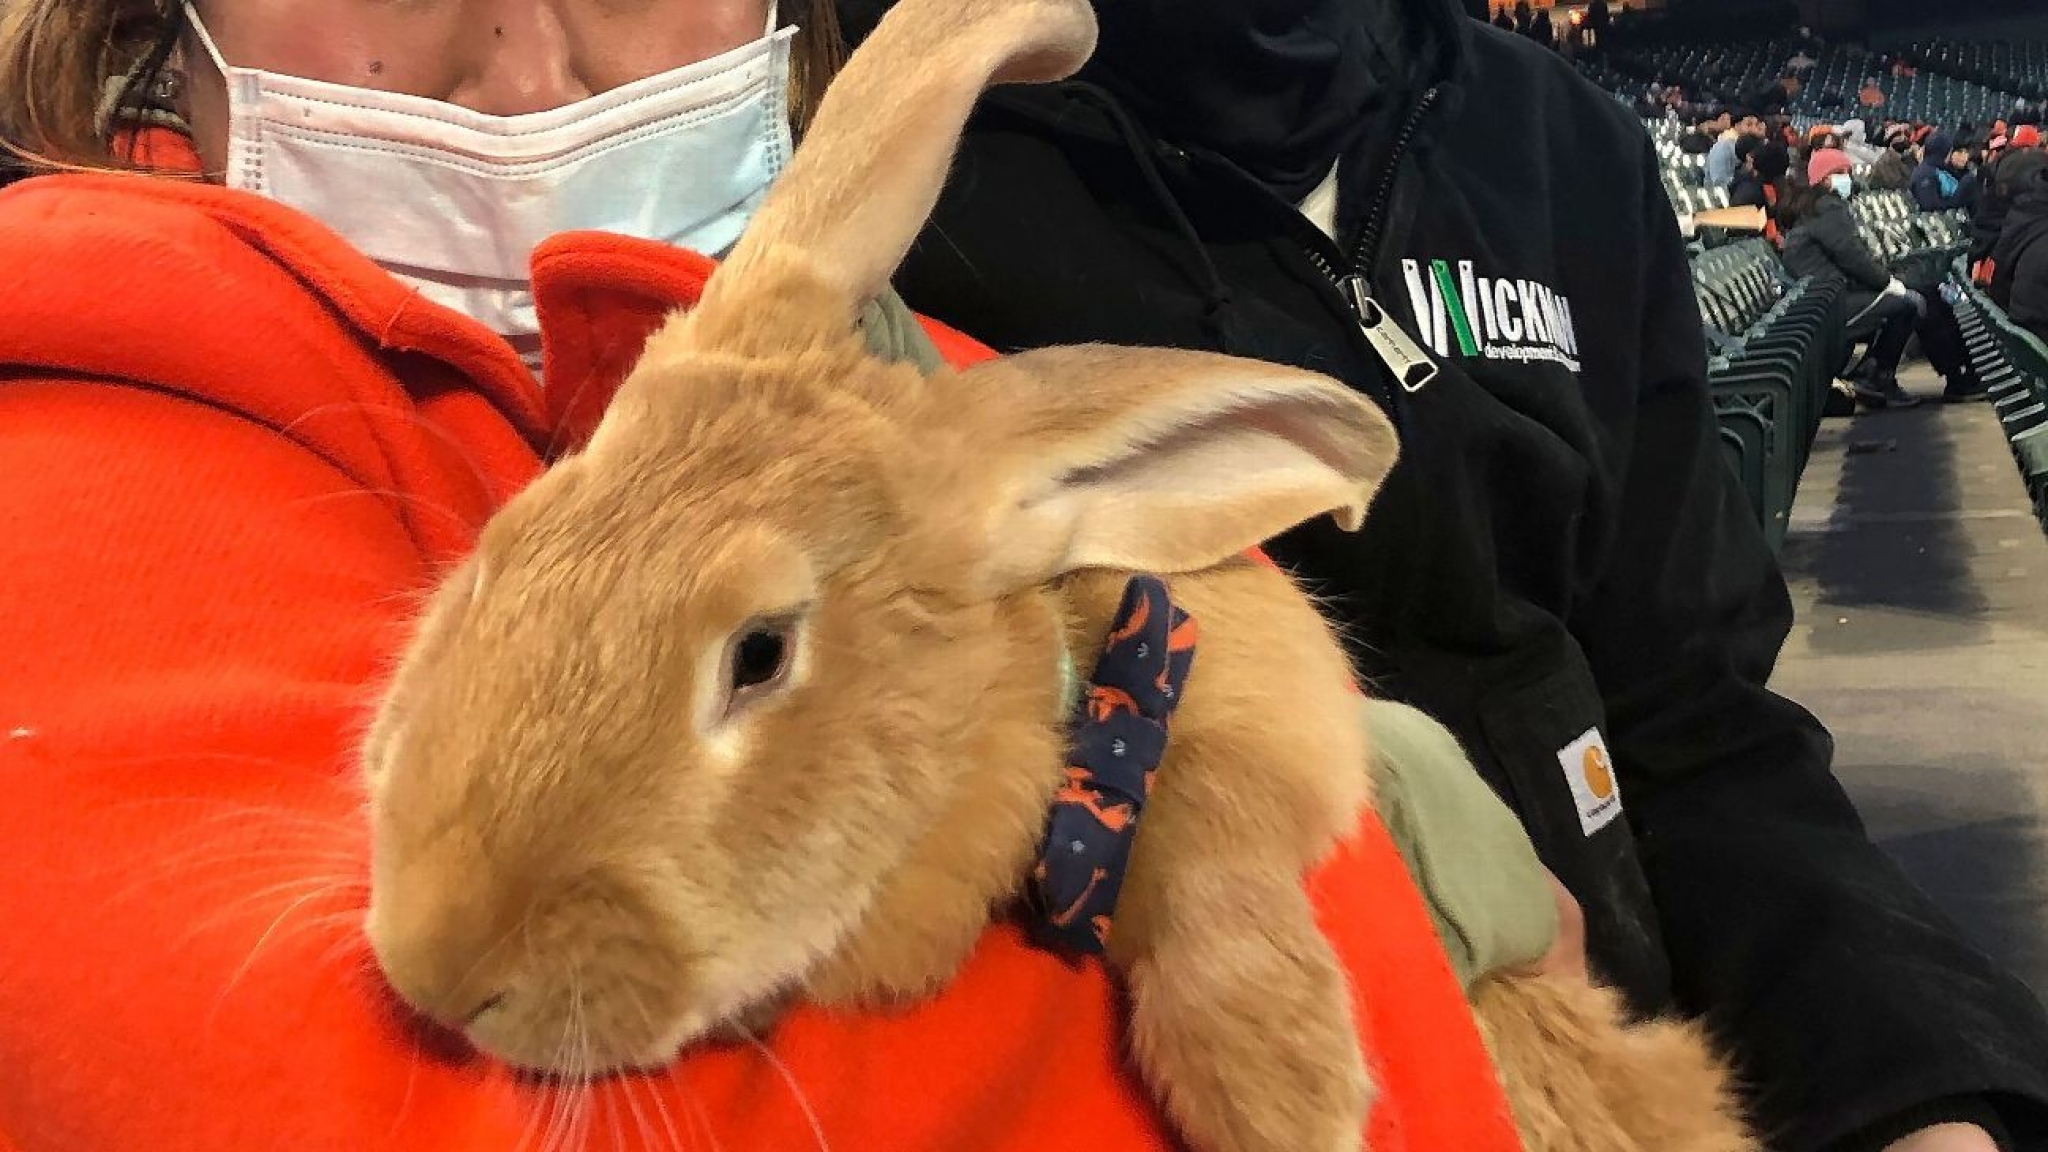 Therapy bunny in stands a hit at Giants’ ballpark